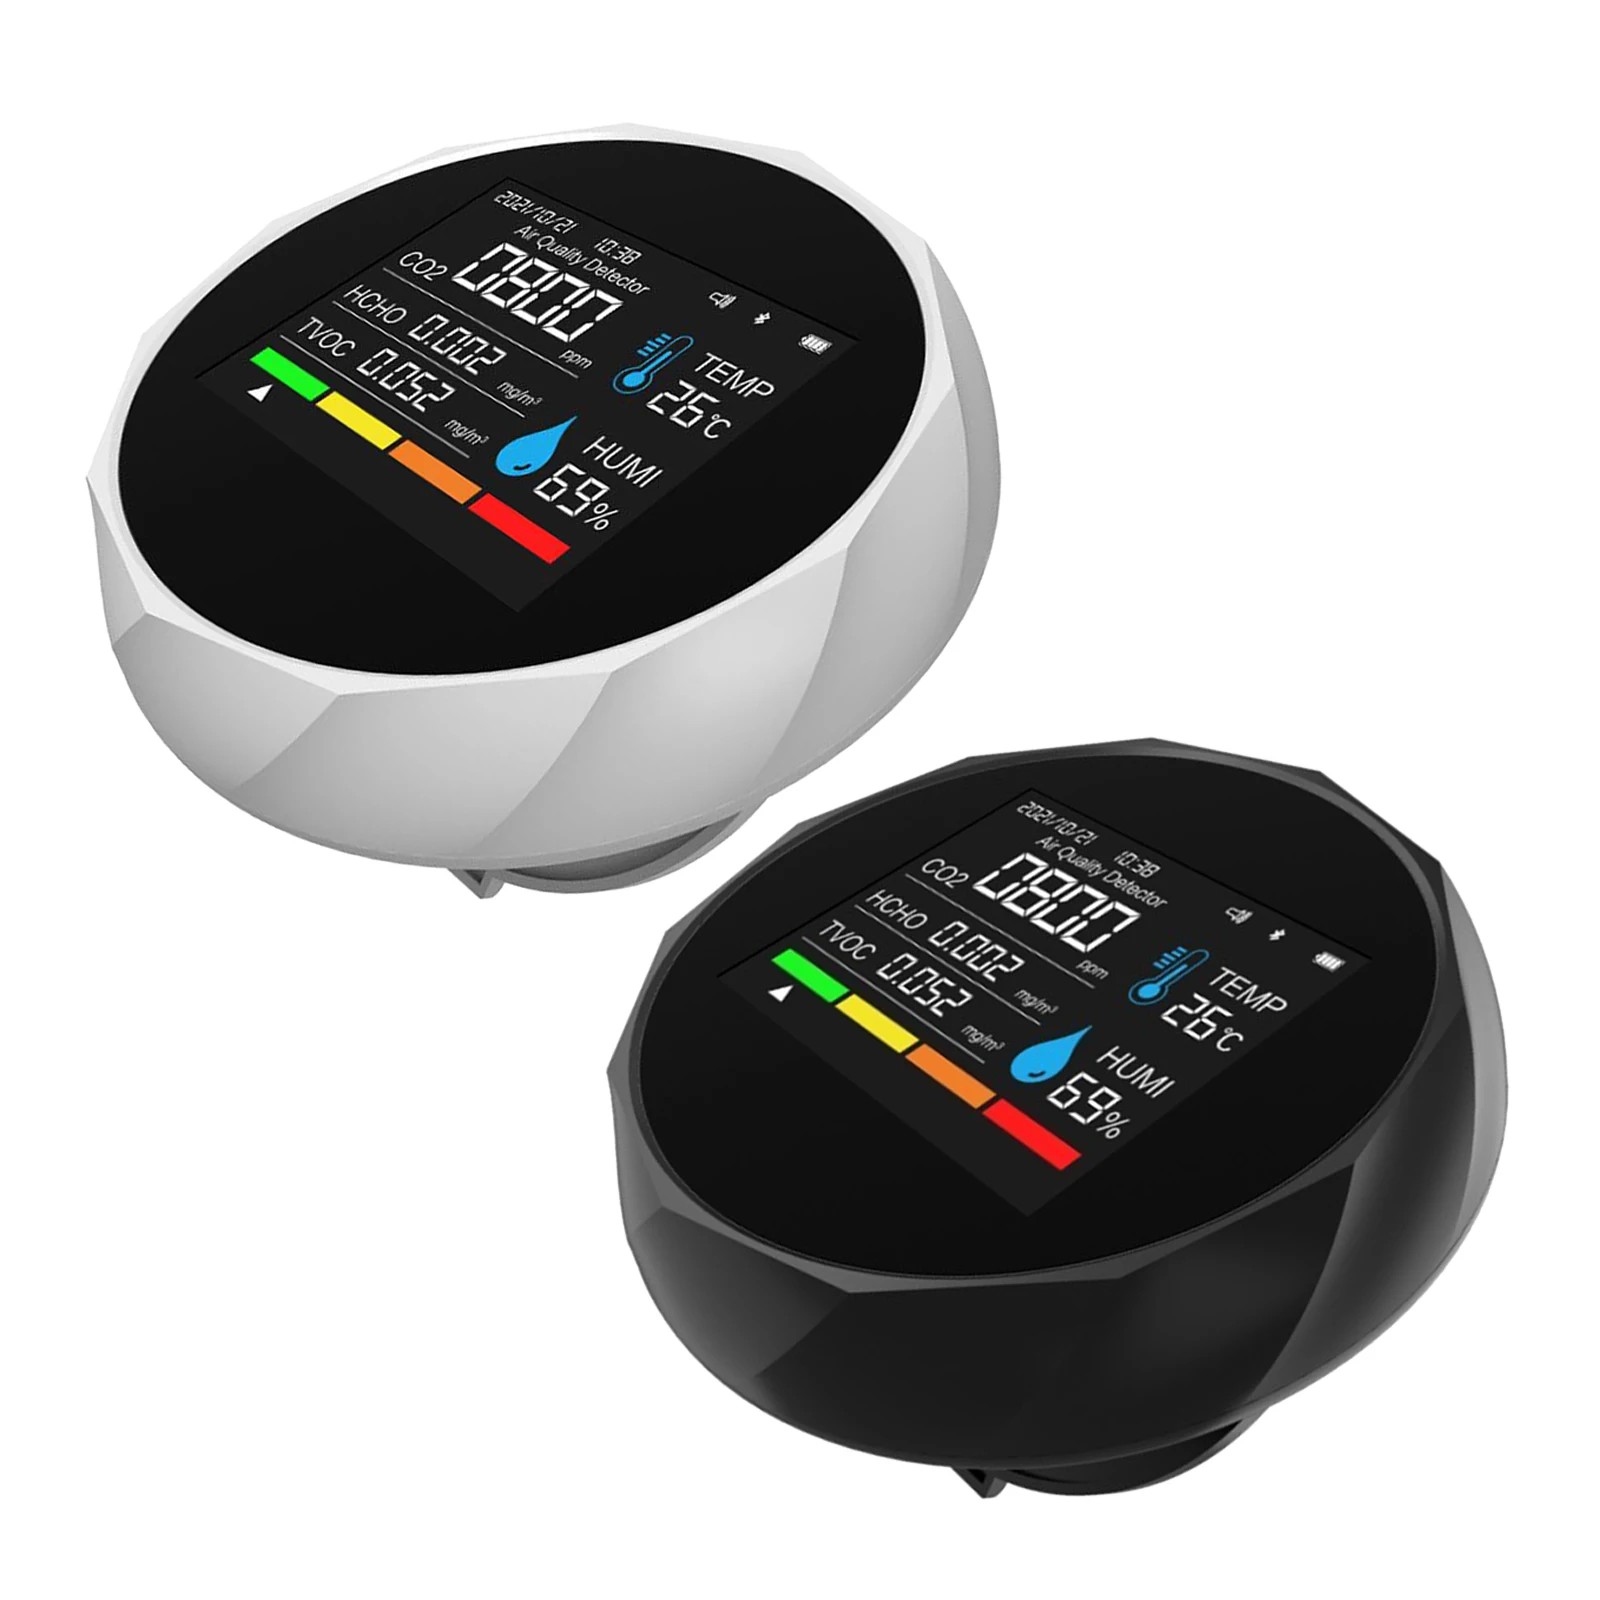  , Temperature and Relative Humidity , Carbon Dioxide Monitor, 4000ppm   , USB Rechargeable